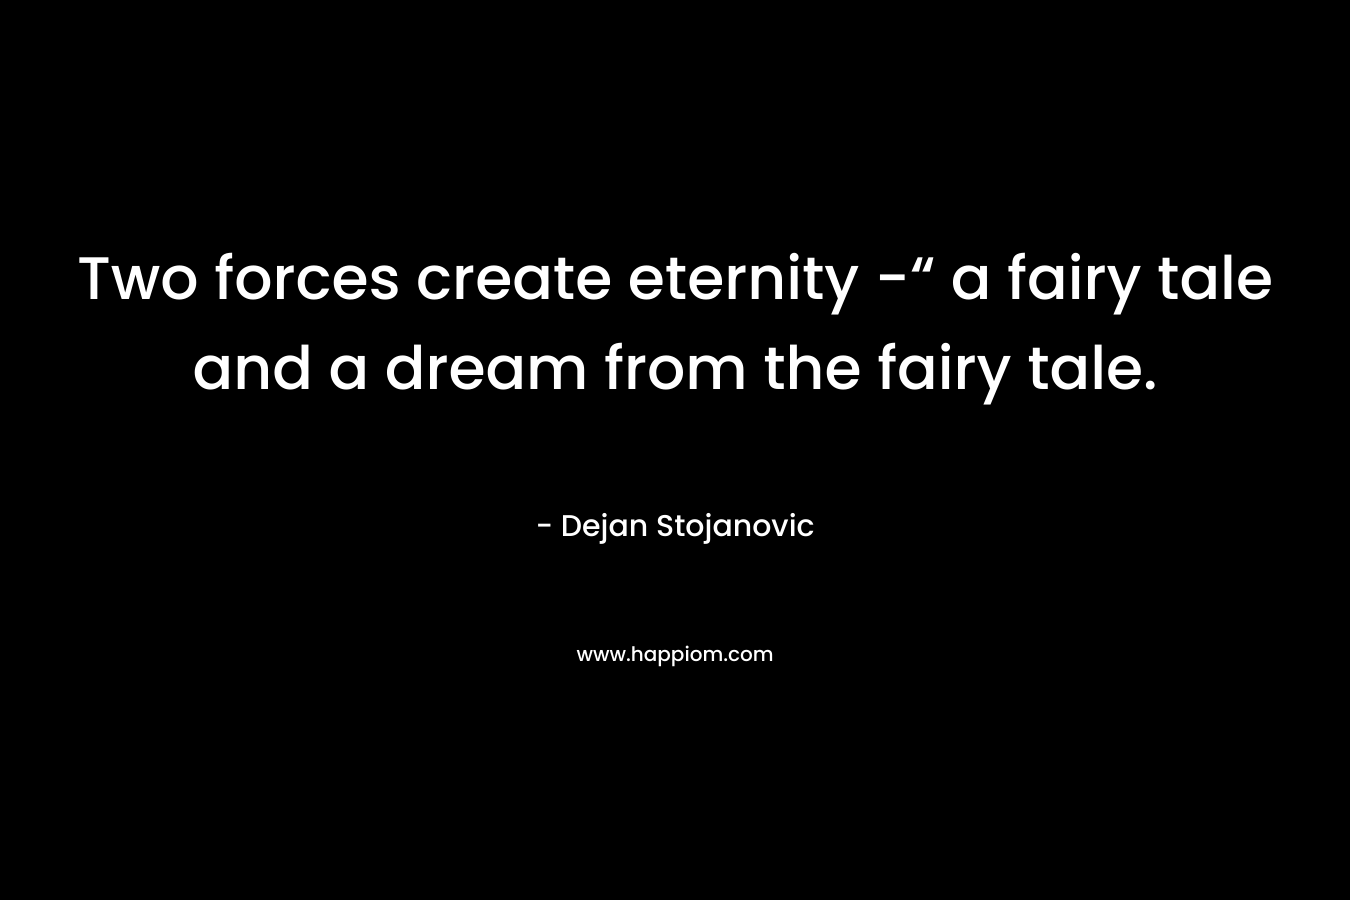 Two forces create eternity -“ a fairy tale and a dream from the fairy tale.